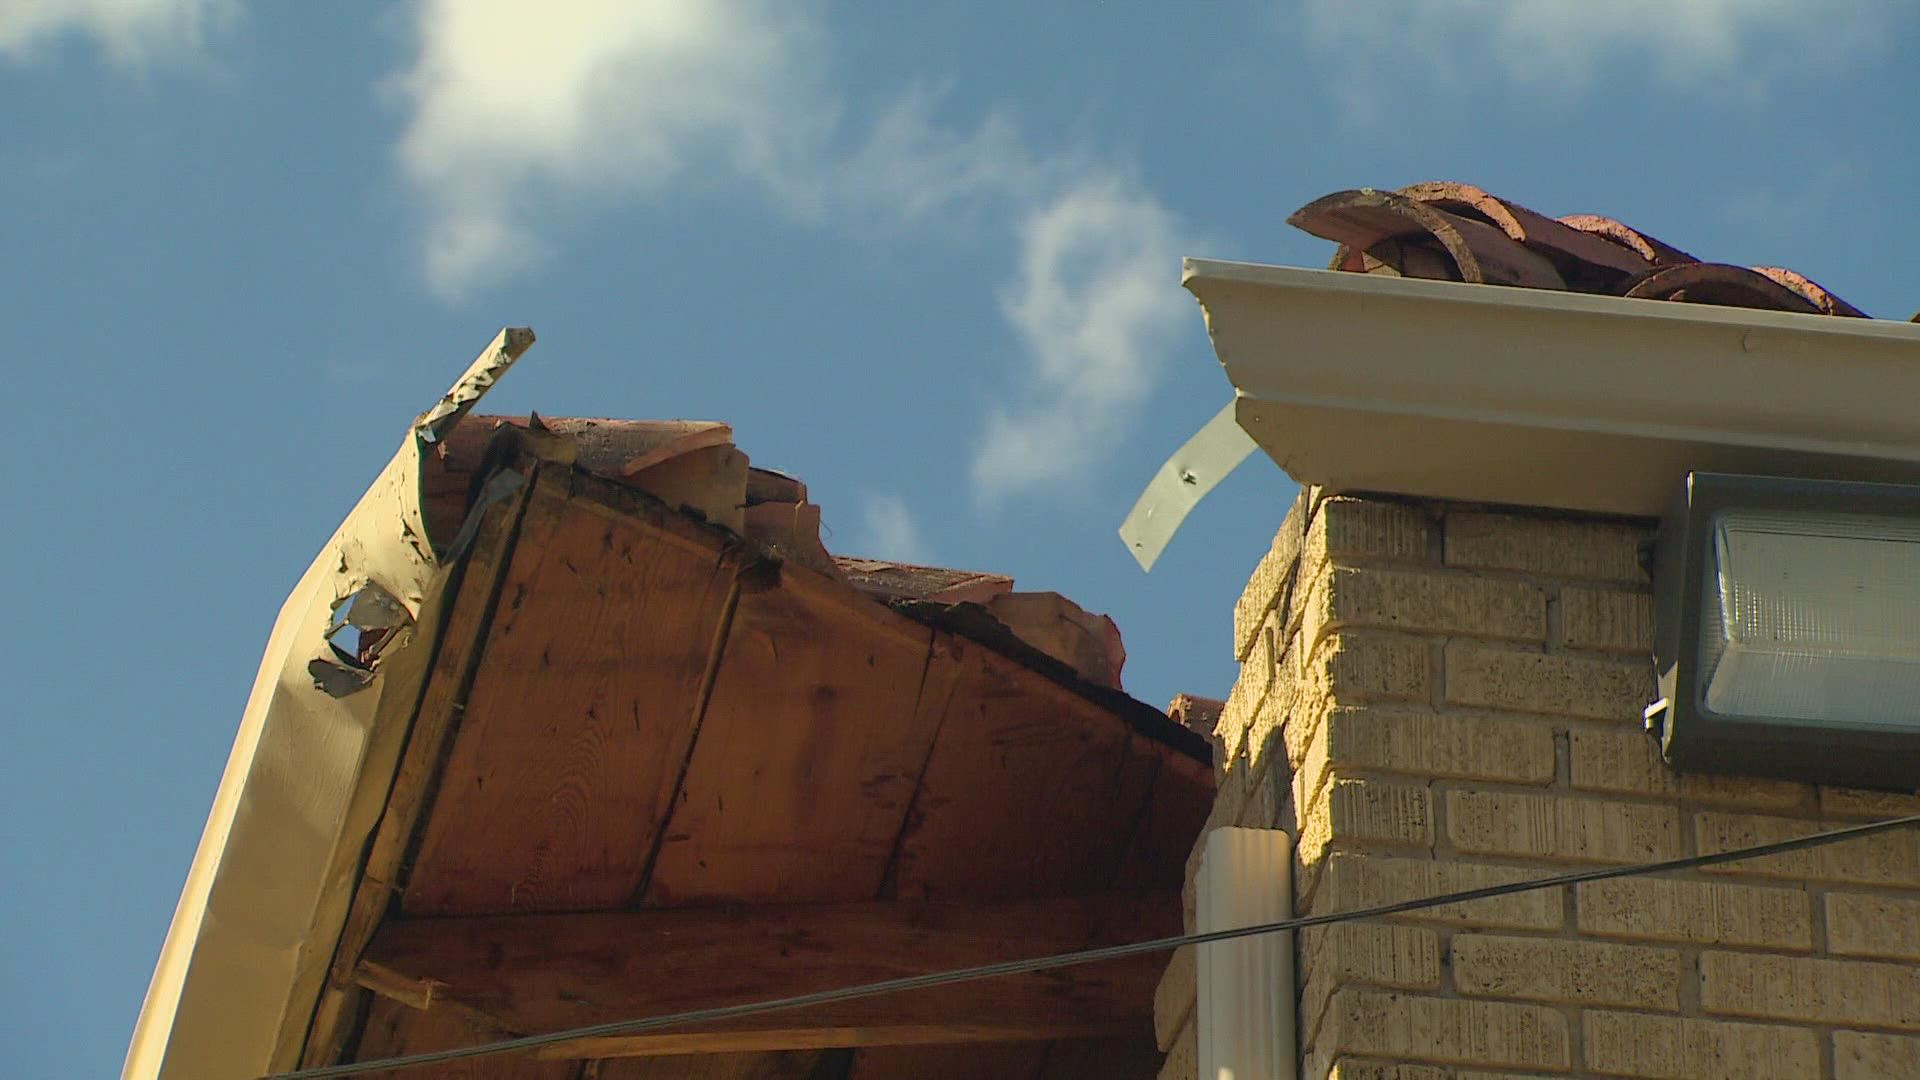 Part of a roof collapsed at a two-story apartment building in the Lower Greenville area of Dallas on Sunday afternoon, officials said.